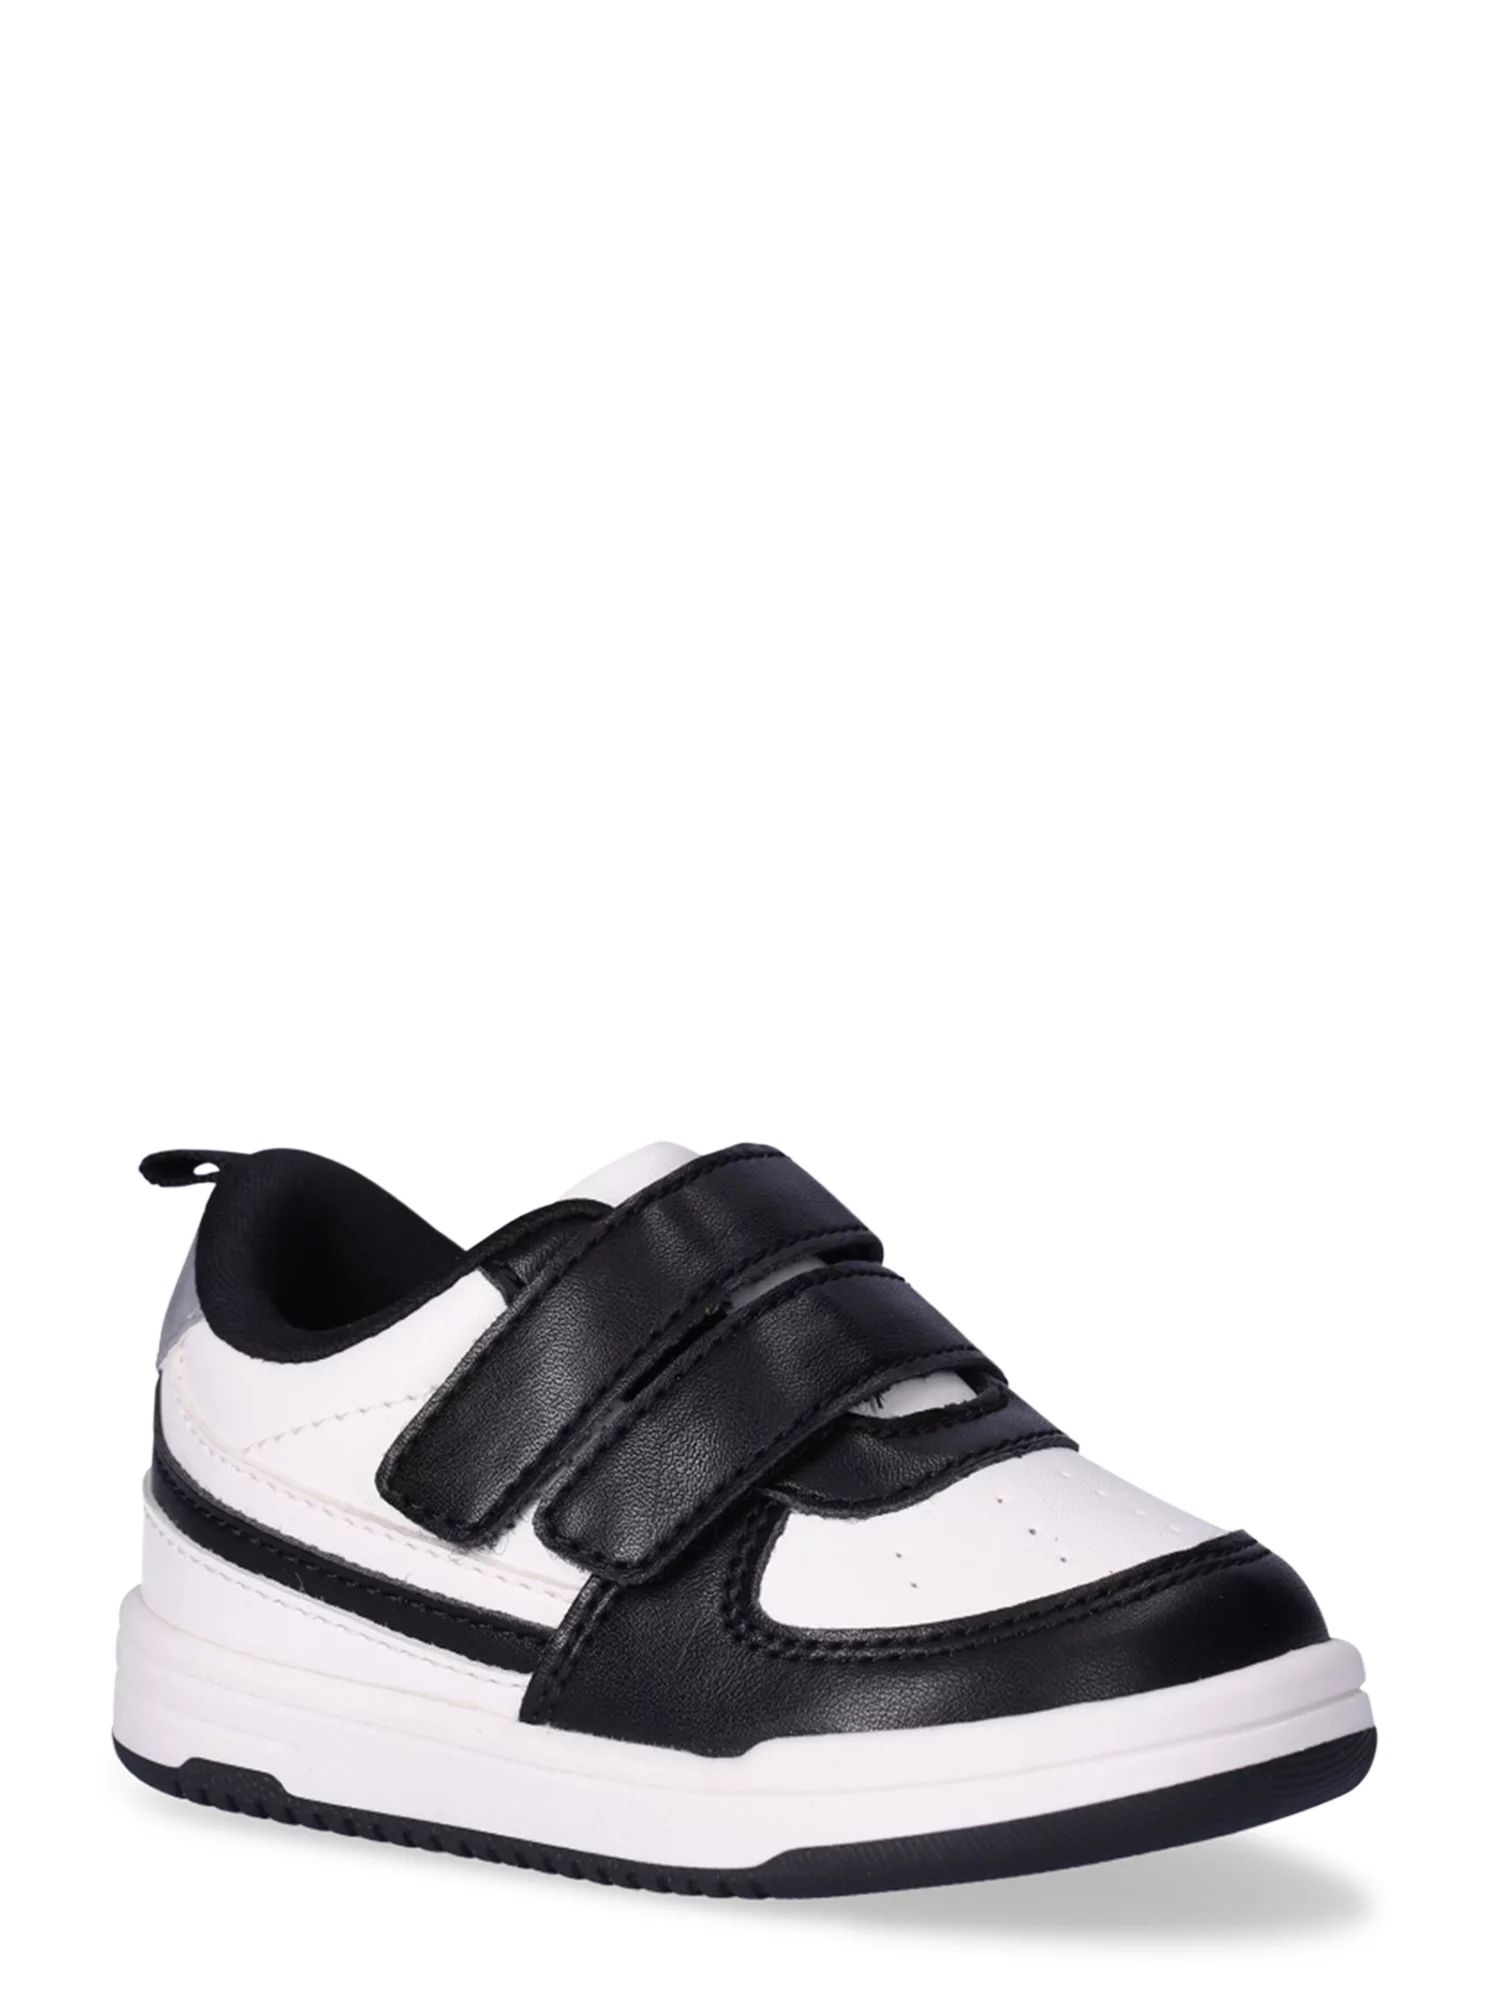 Wonder Nation Baby Boys Casual Double Strap Shoes, Sizes 2-6 | Walmart (US)